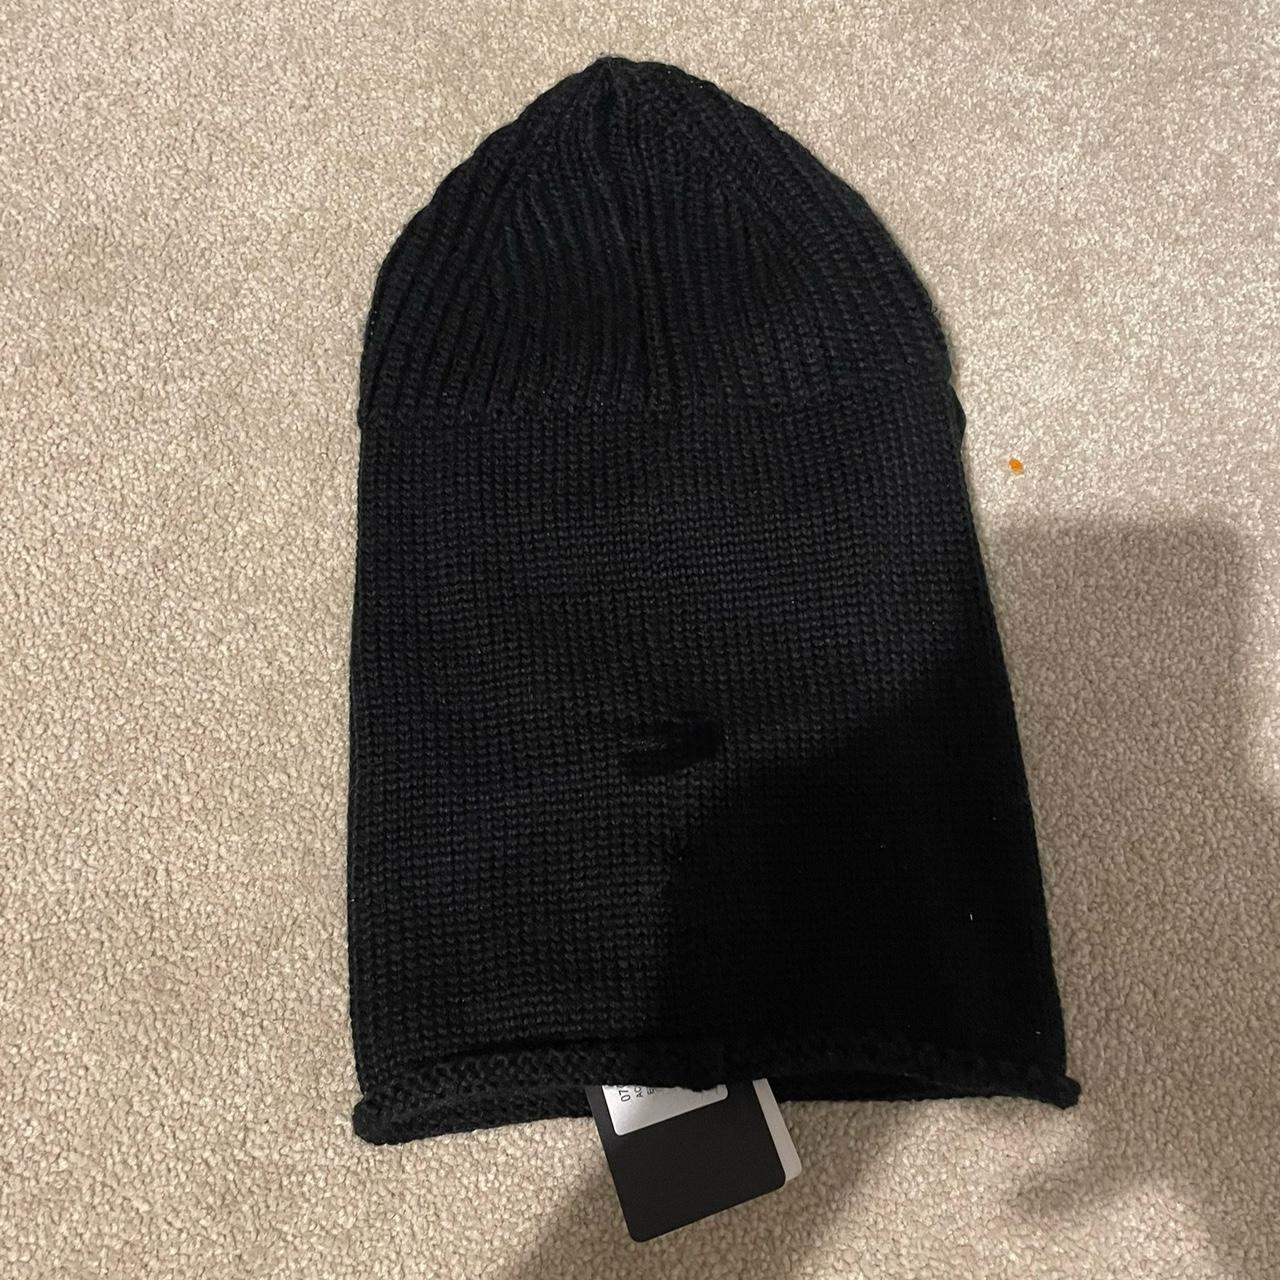 Co company balaclava Next day shipping Open to offer - Depop